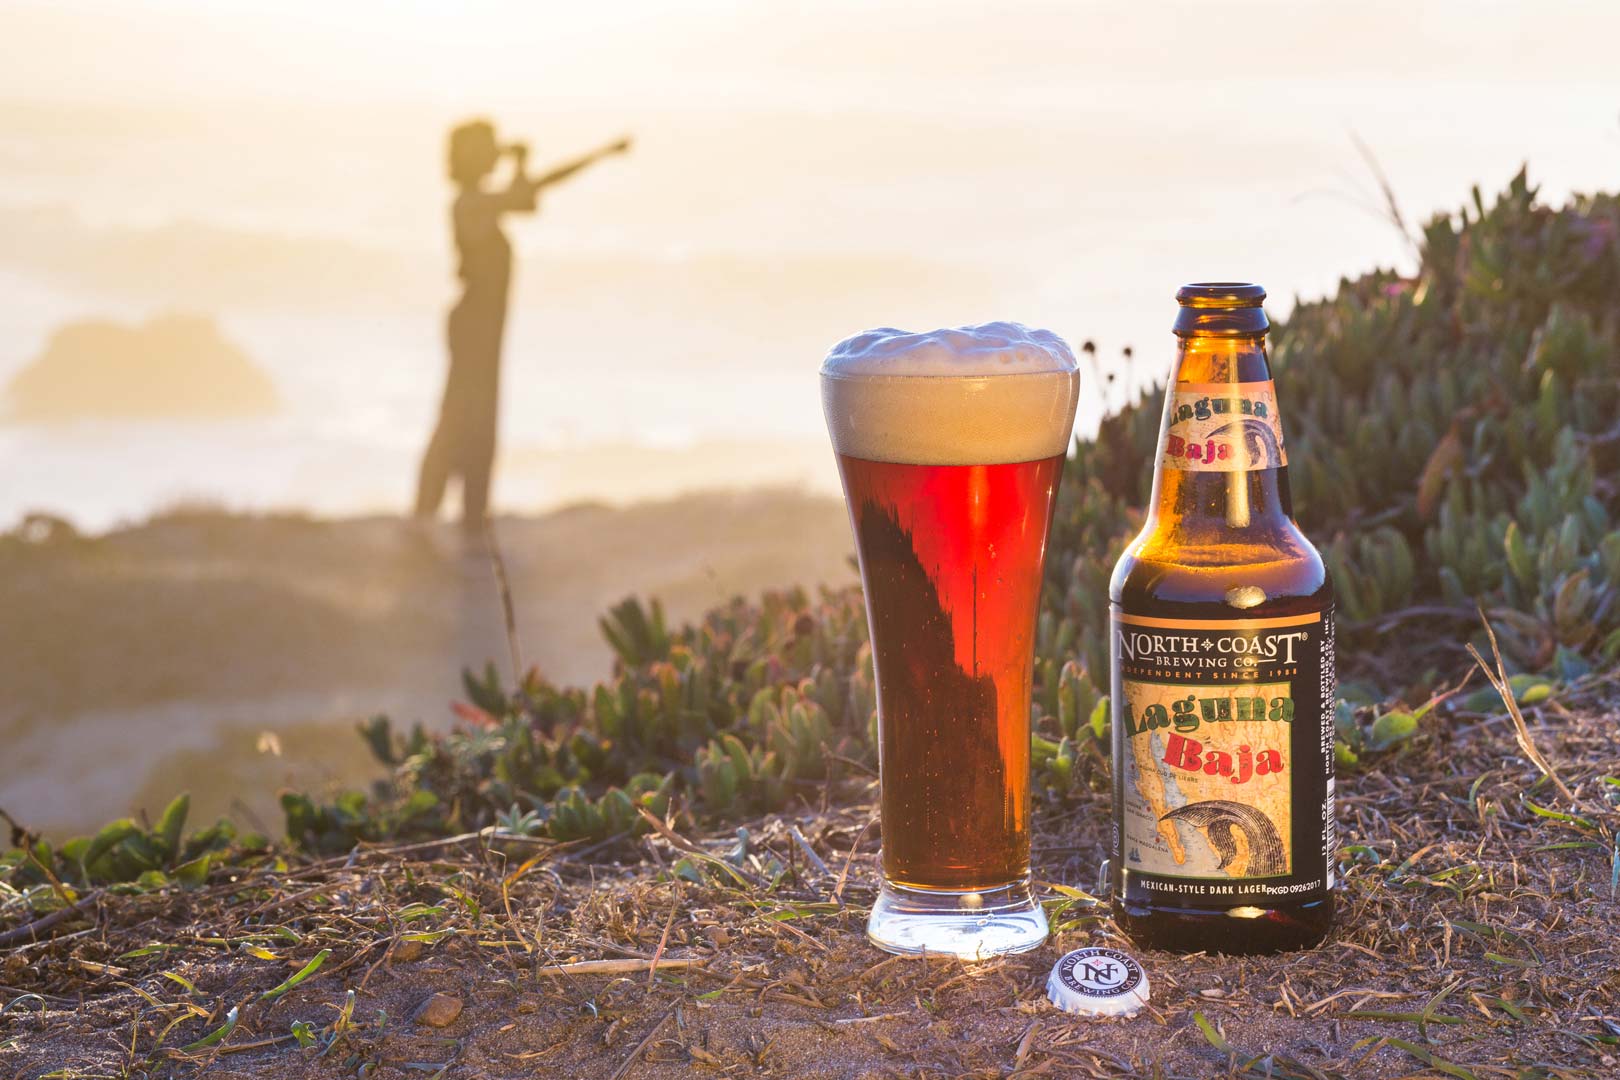 Put down your IPA and try Laguna Baja, our new Mexican-Style Dark Lager